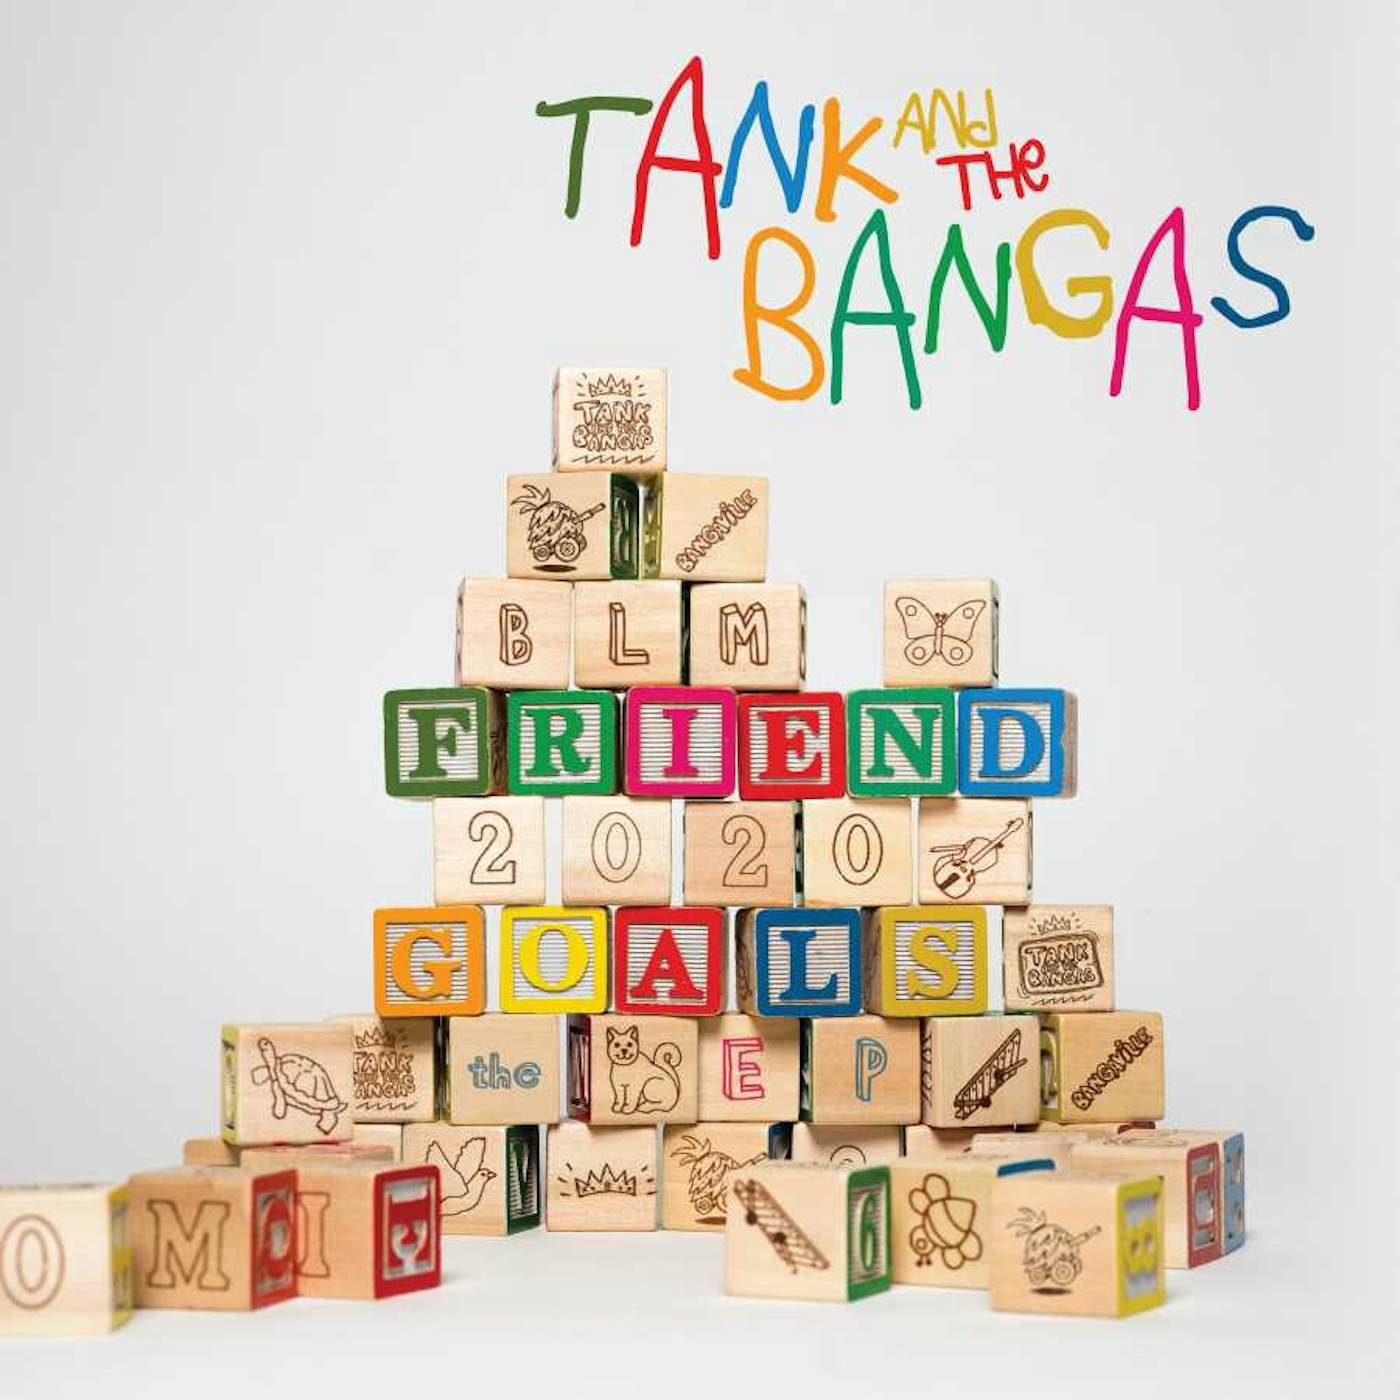 Tank and The Bangas Friend Goals Vinyl Record